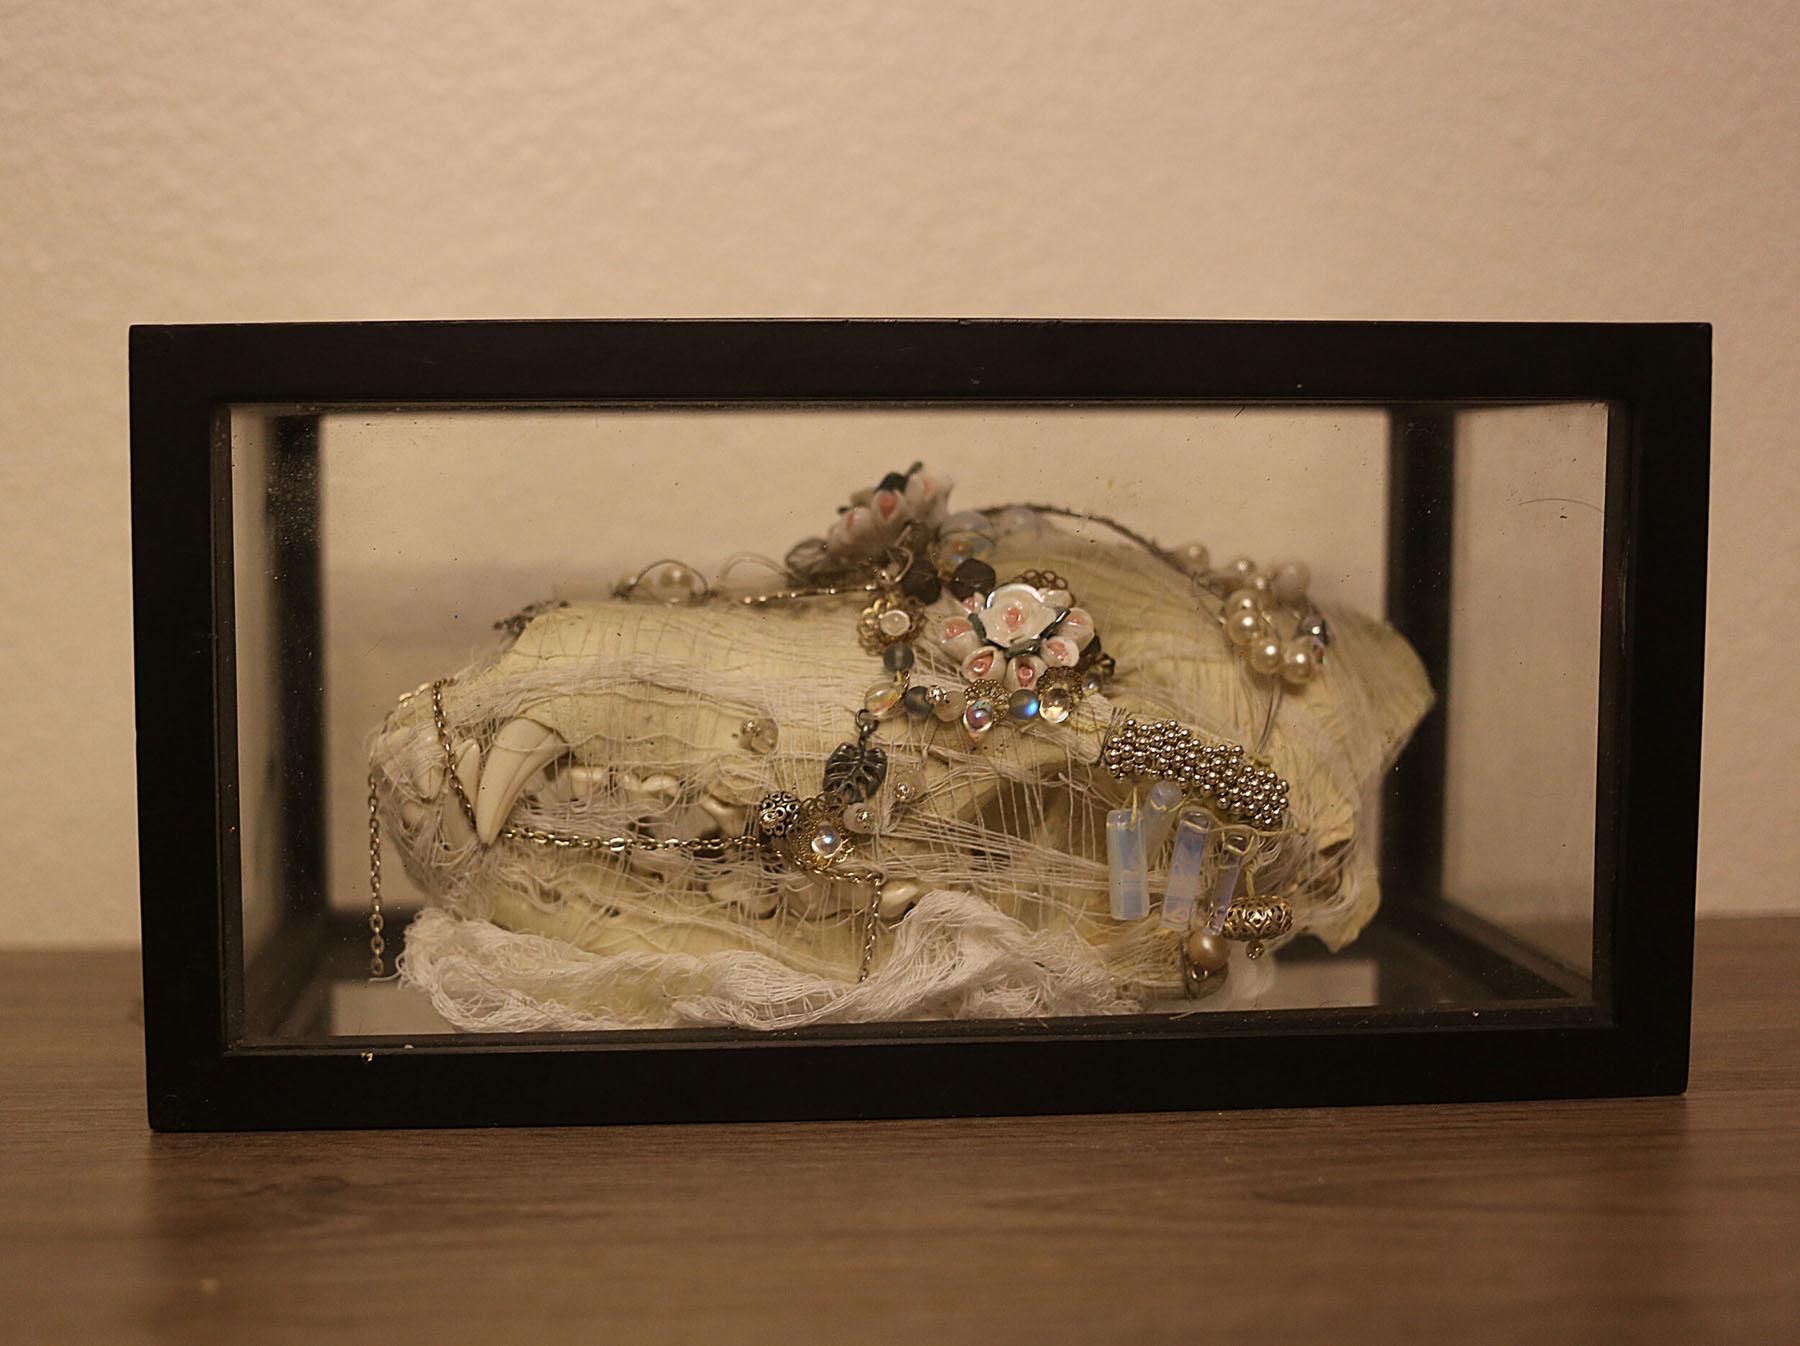 Carved wolf skull adorned with cheesecloth, silver wire, pearls and beads in a glass case. Image courtesy of Indi Walter